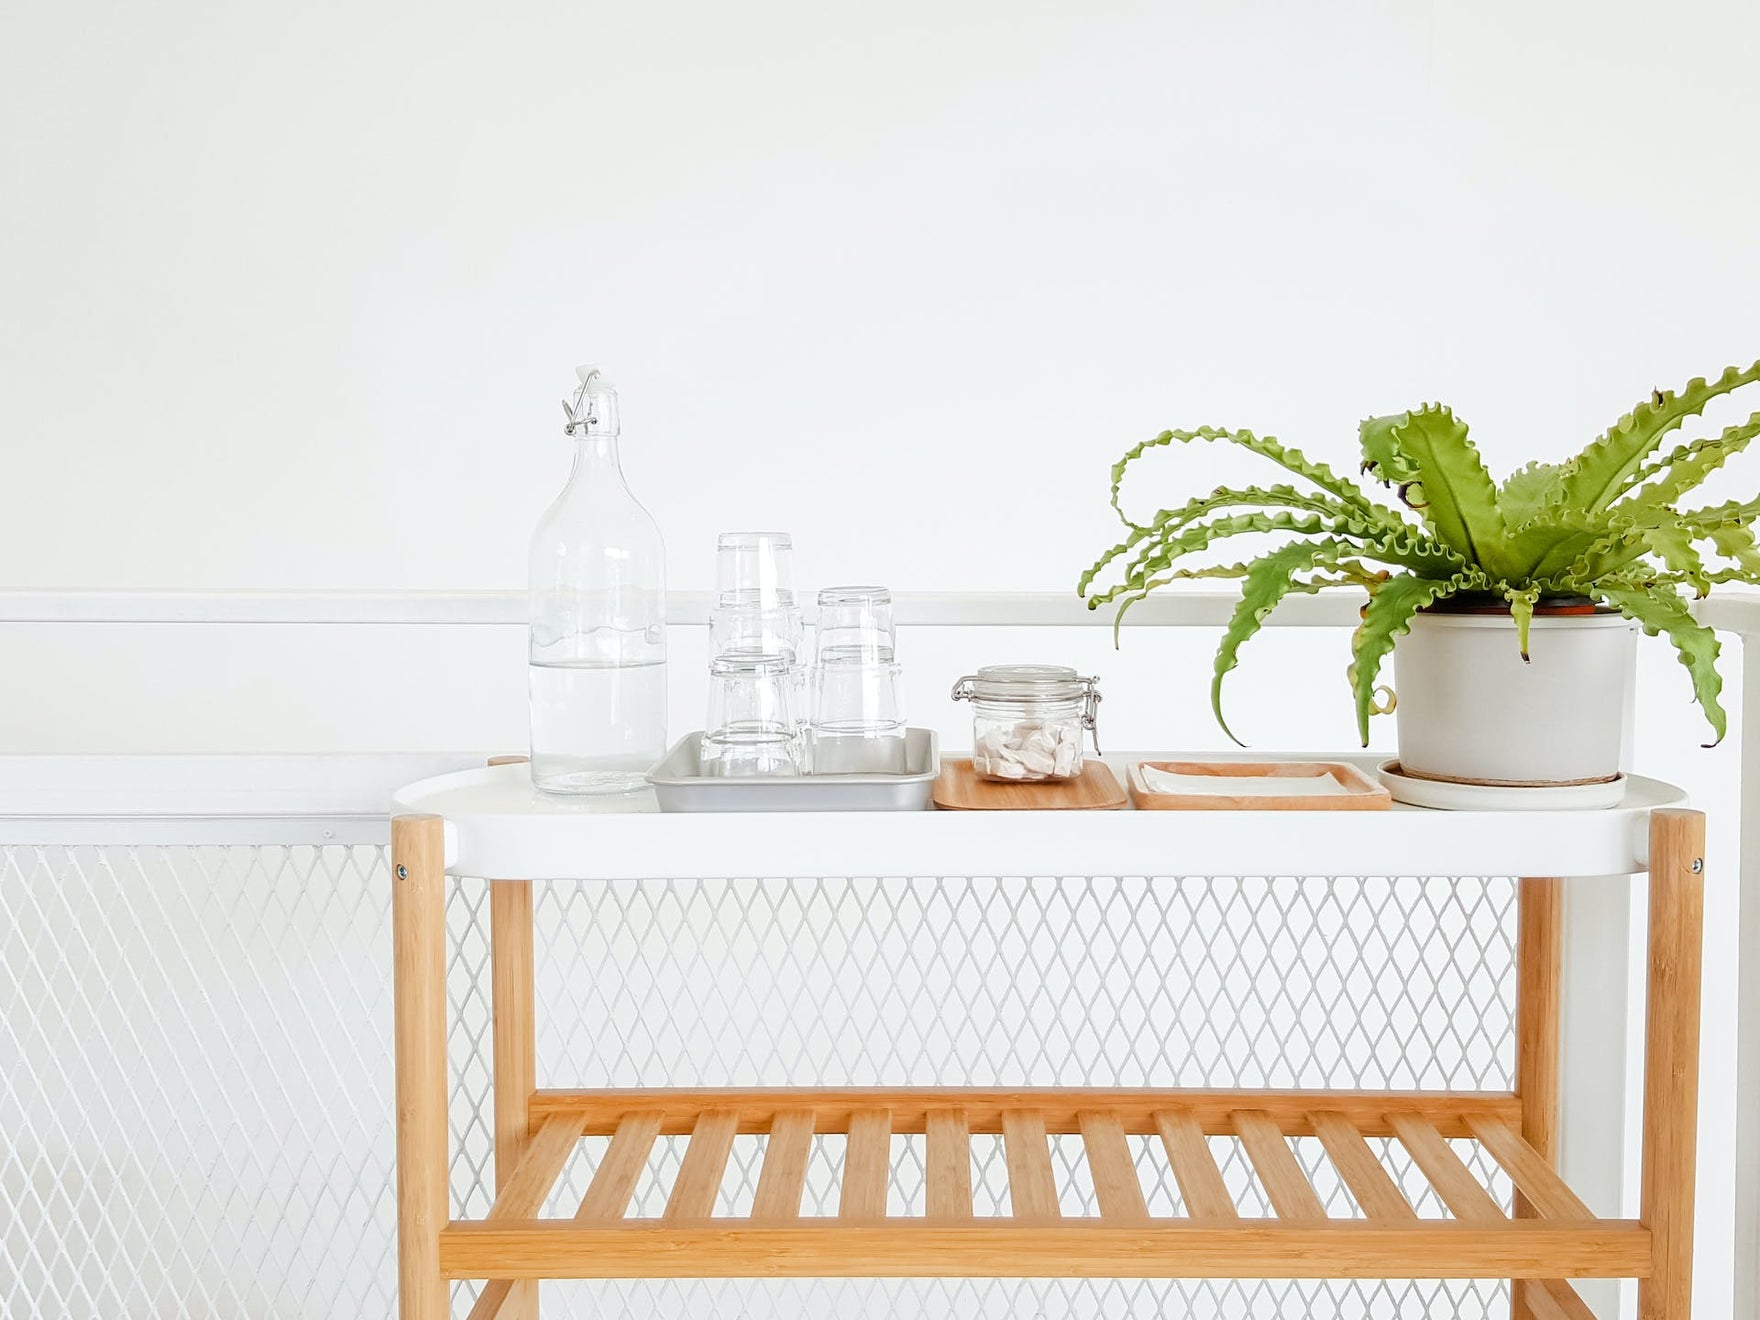 A white bathroom countertop with glass jars and a small green plant in a white pot